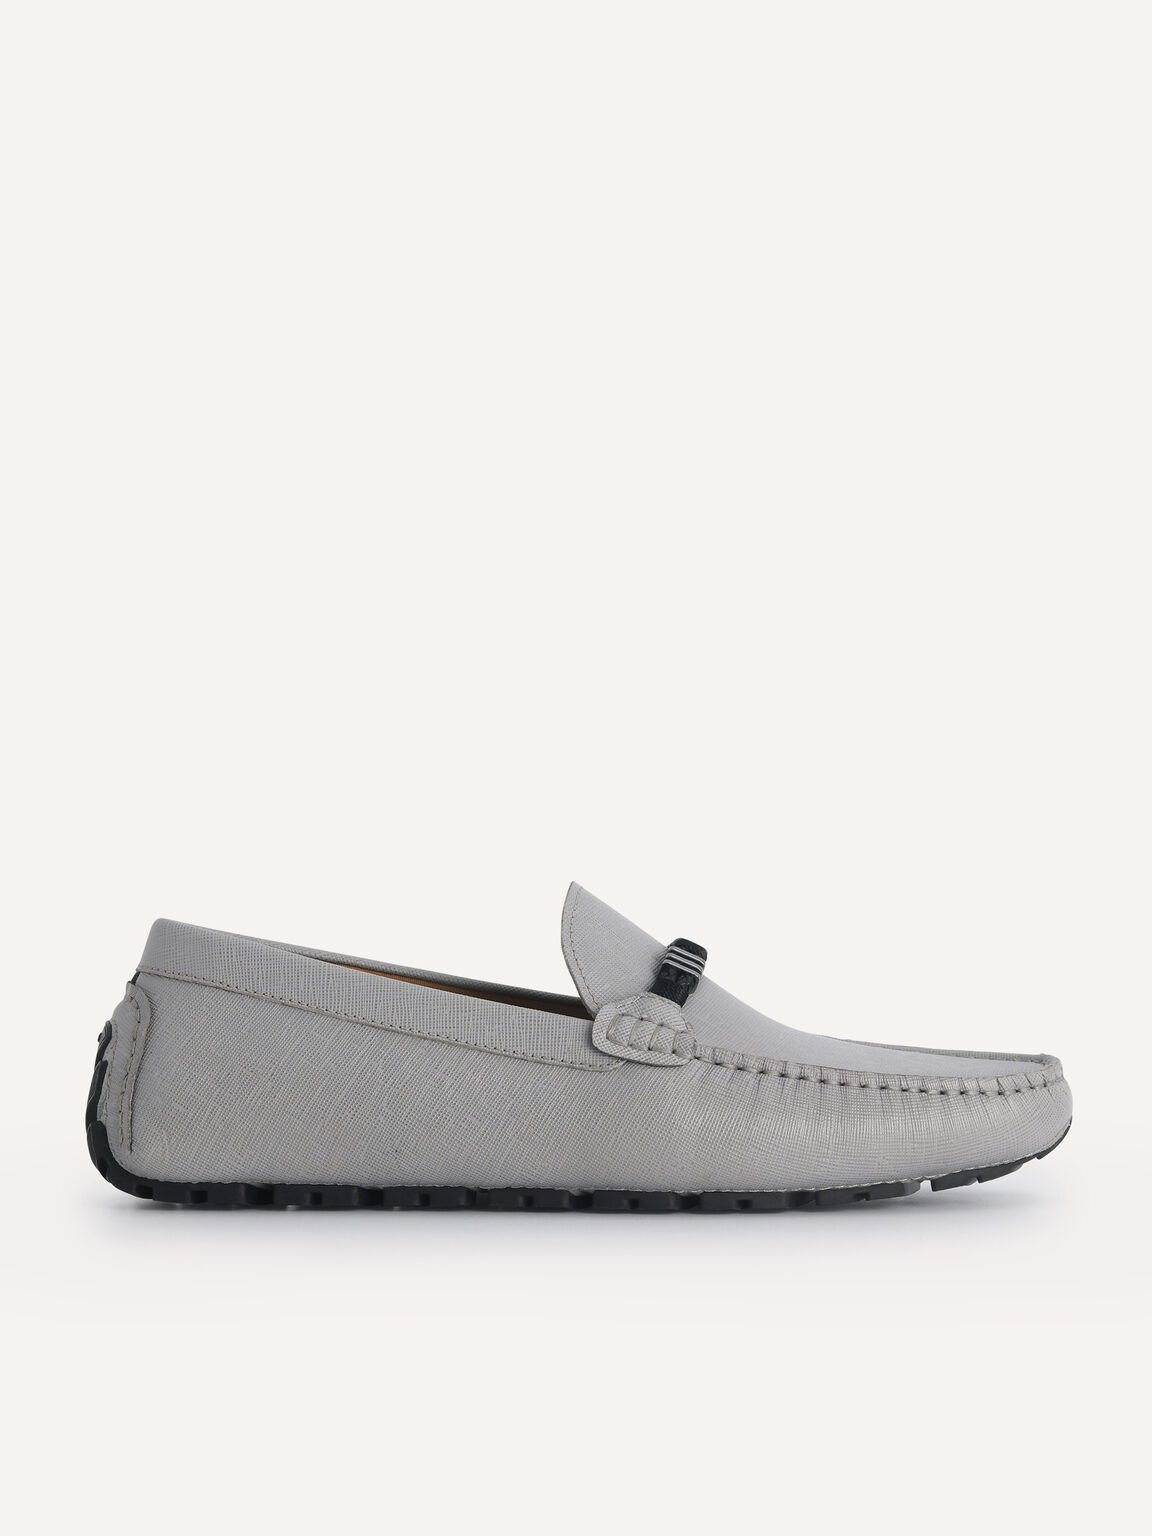 Leather Moccasins with Rope Detailing, Grey, hi-res